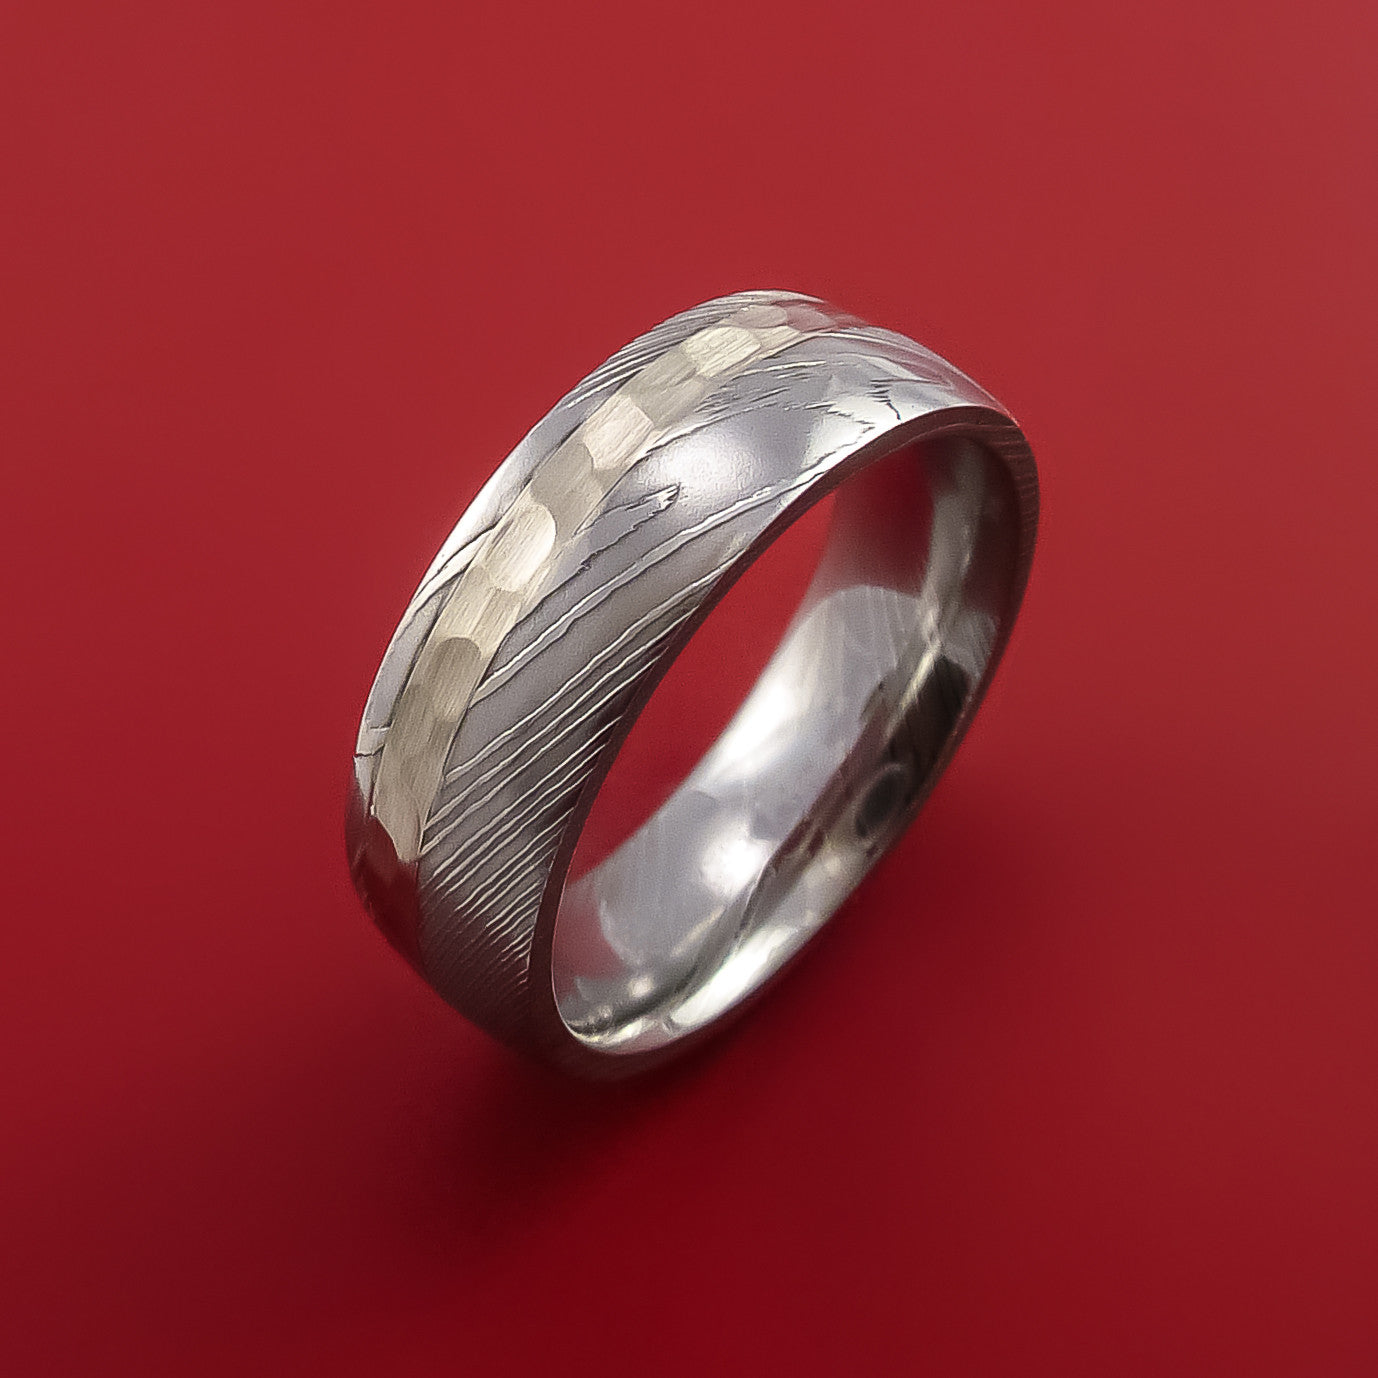 Damascus Steel Ring with 14K White Gold Inlay Custom Made